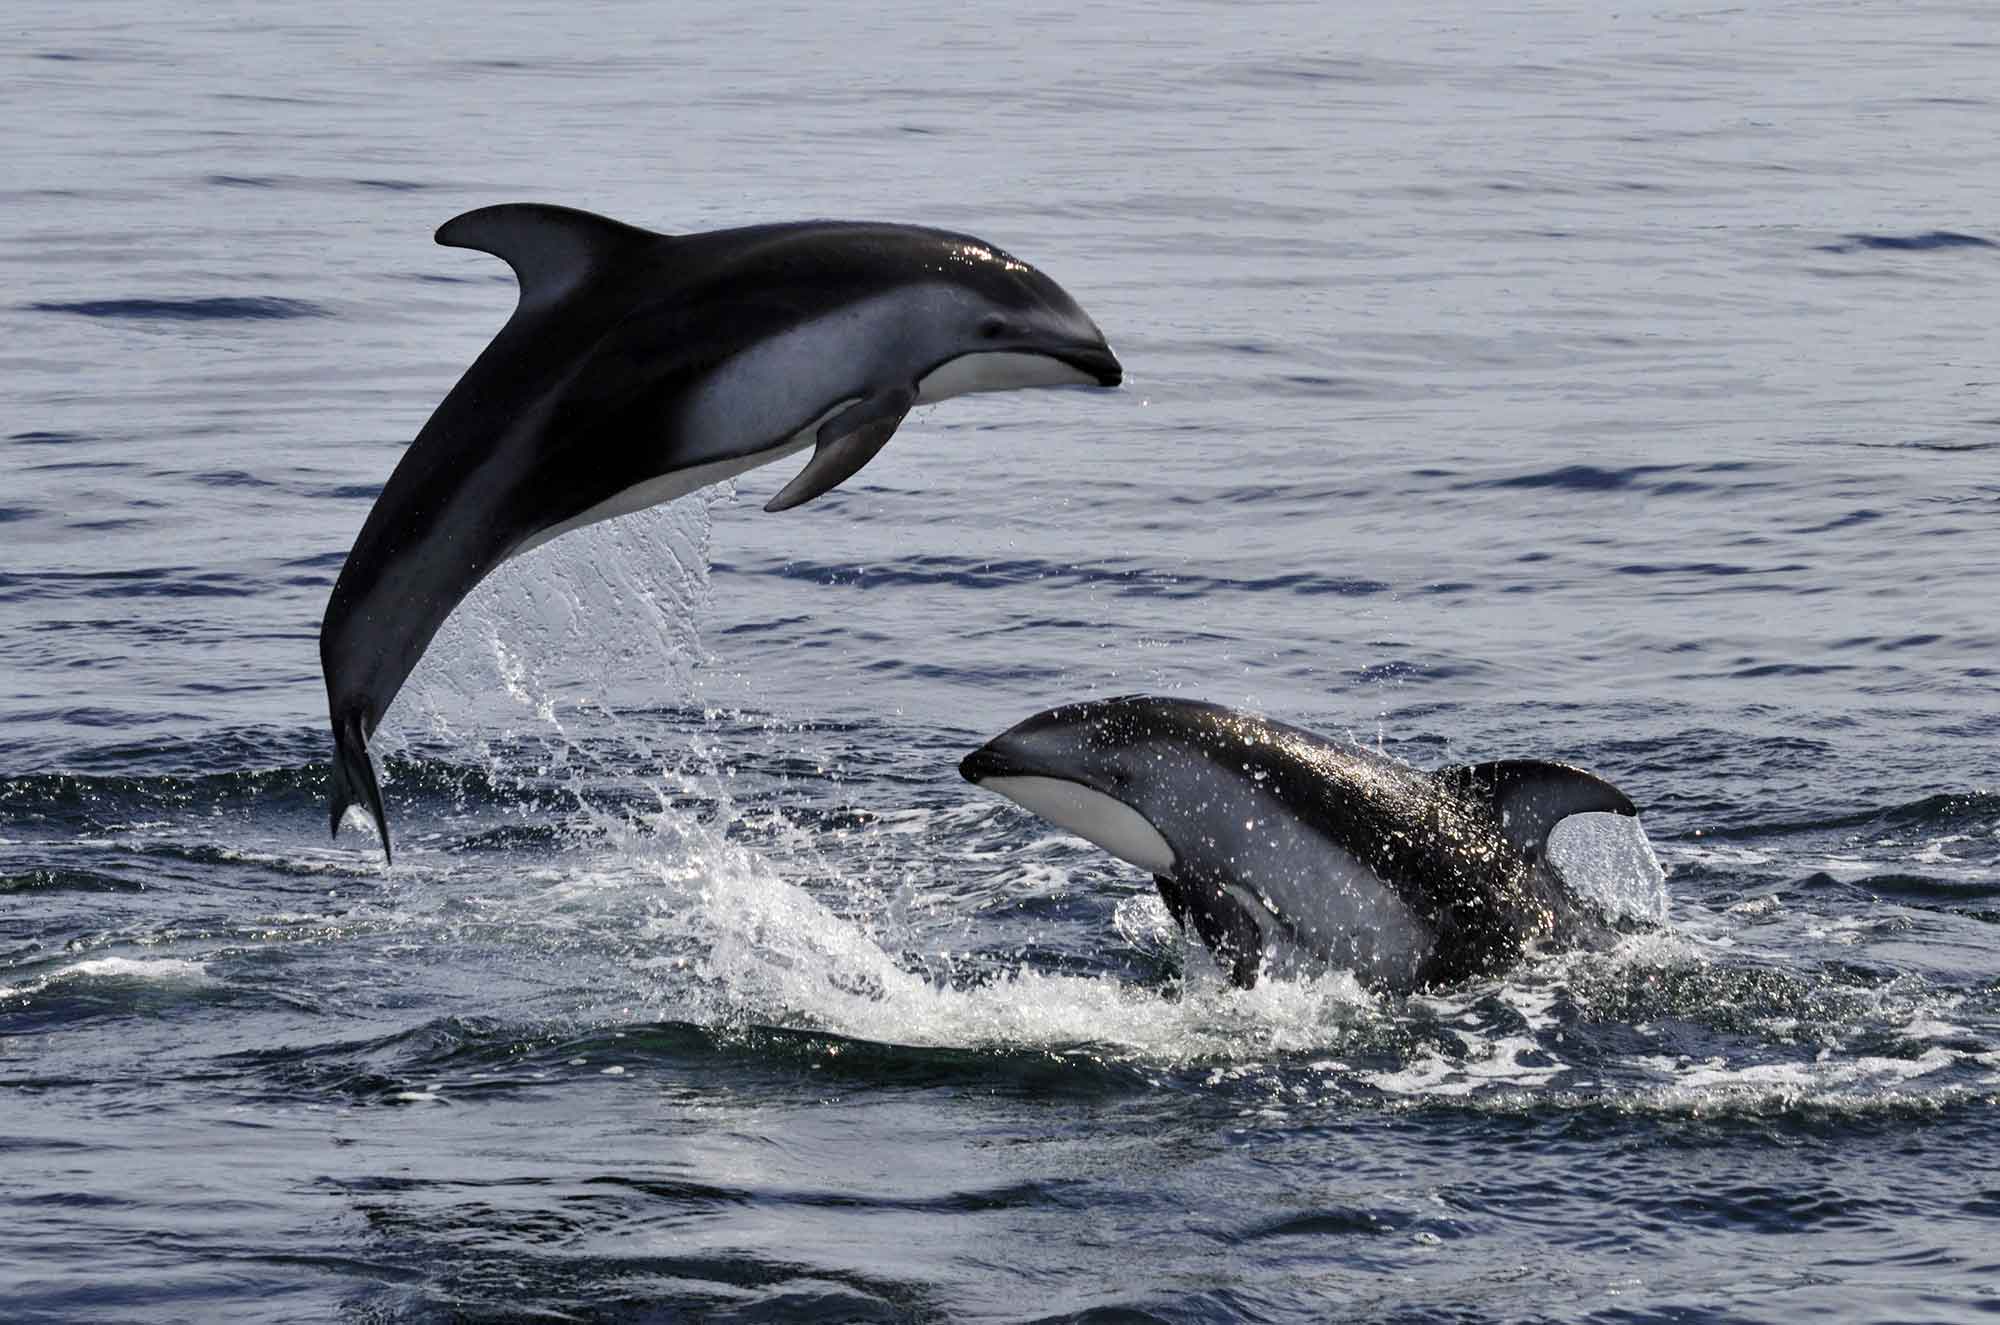 During the cooler winter months Pacific white sided dolphins are regularly seen off San Diego.